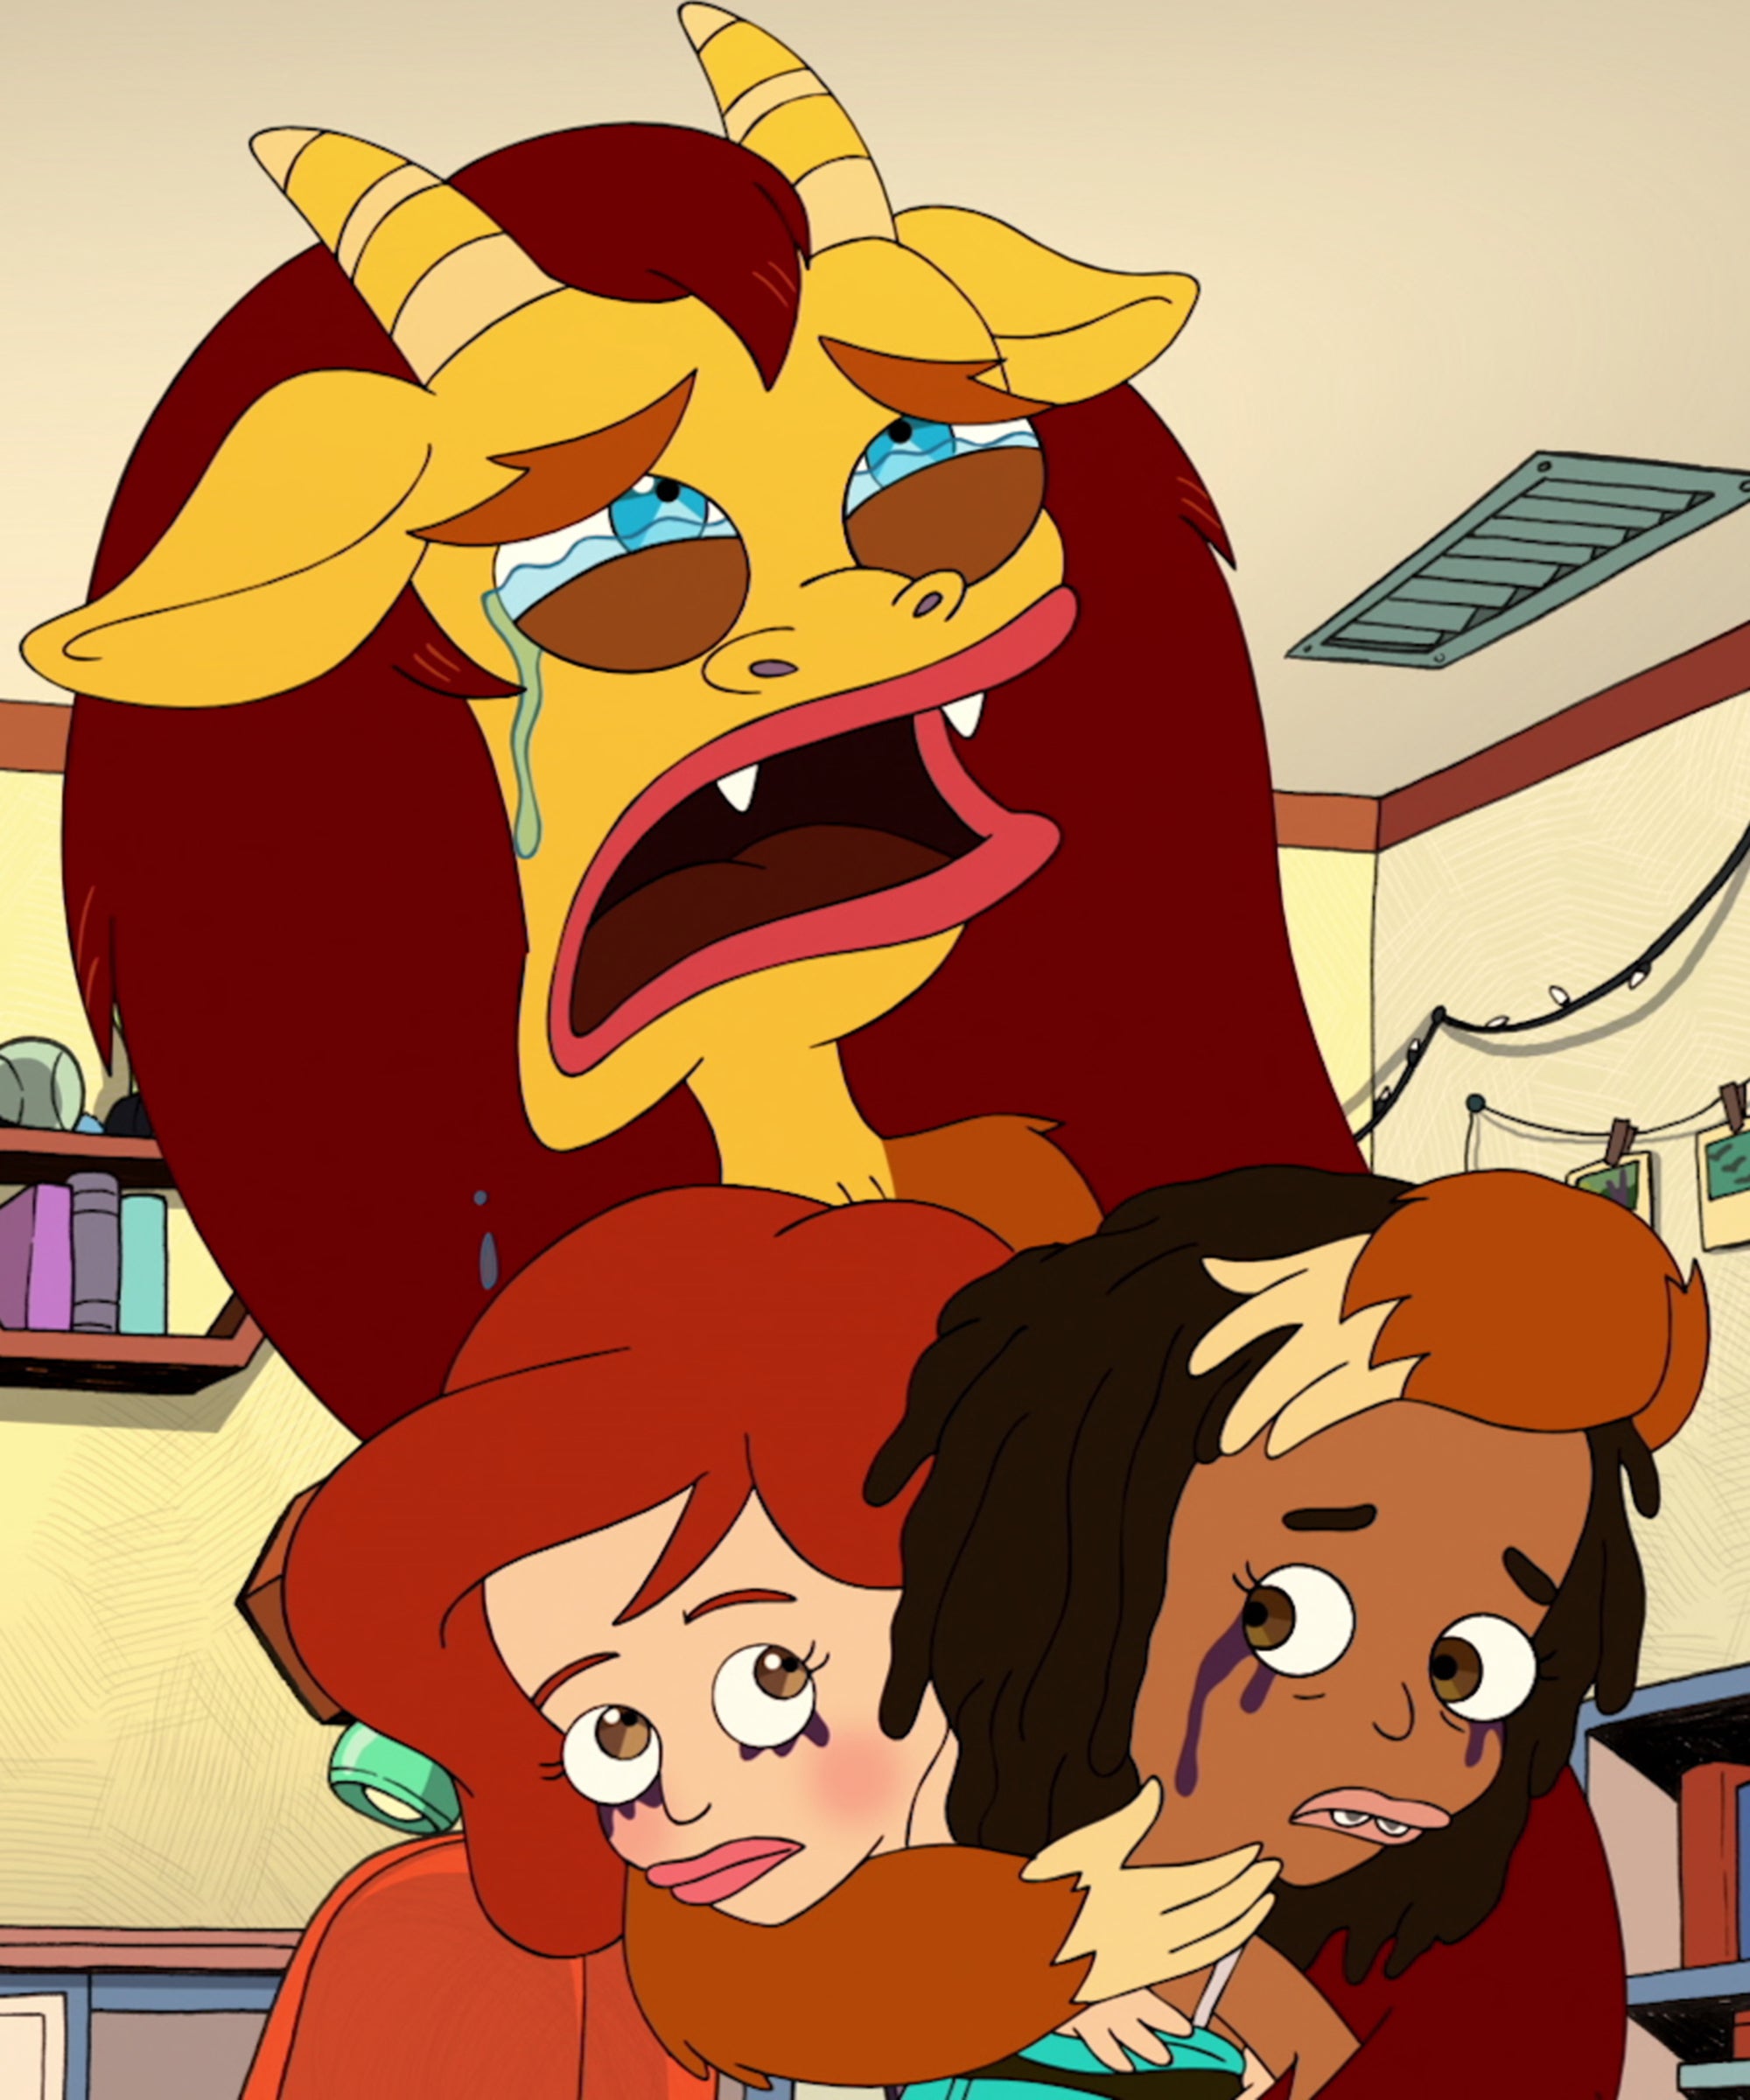 who are the people in the gay test in big mouth